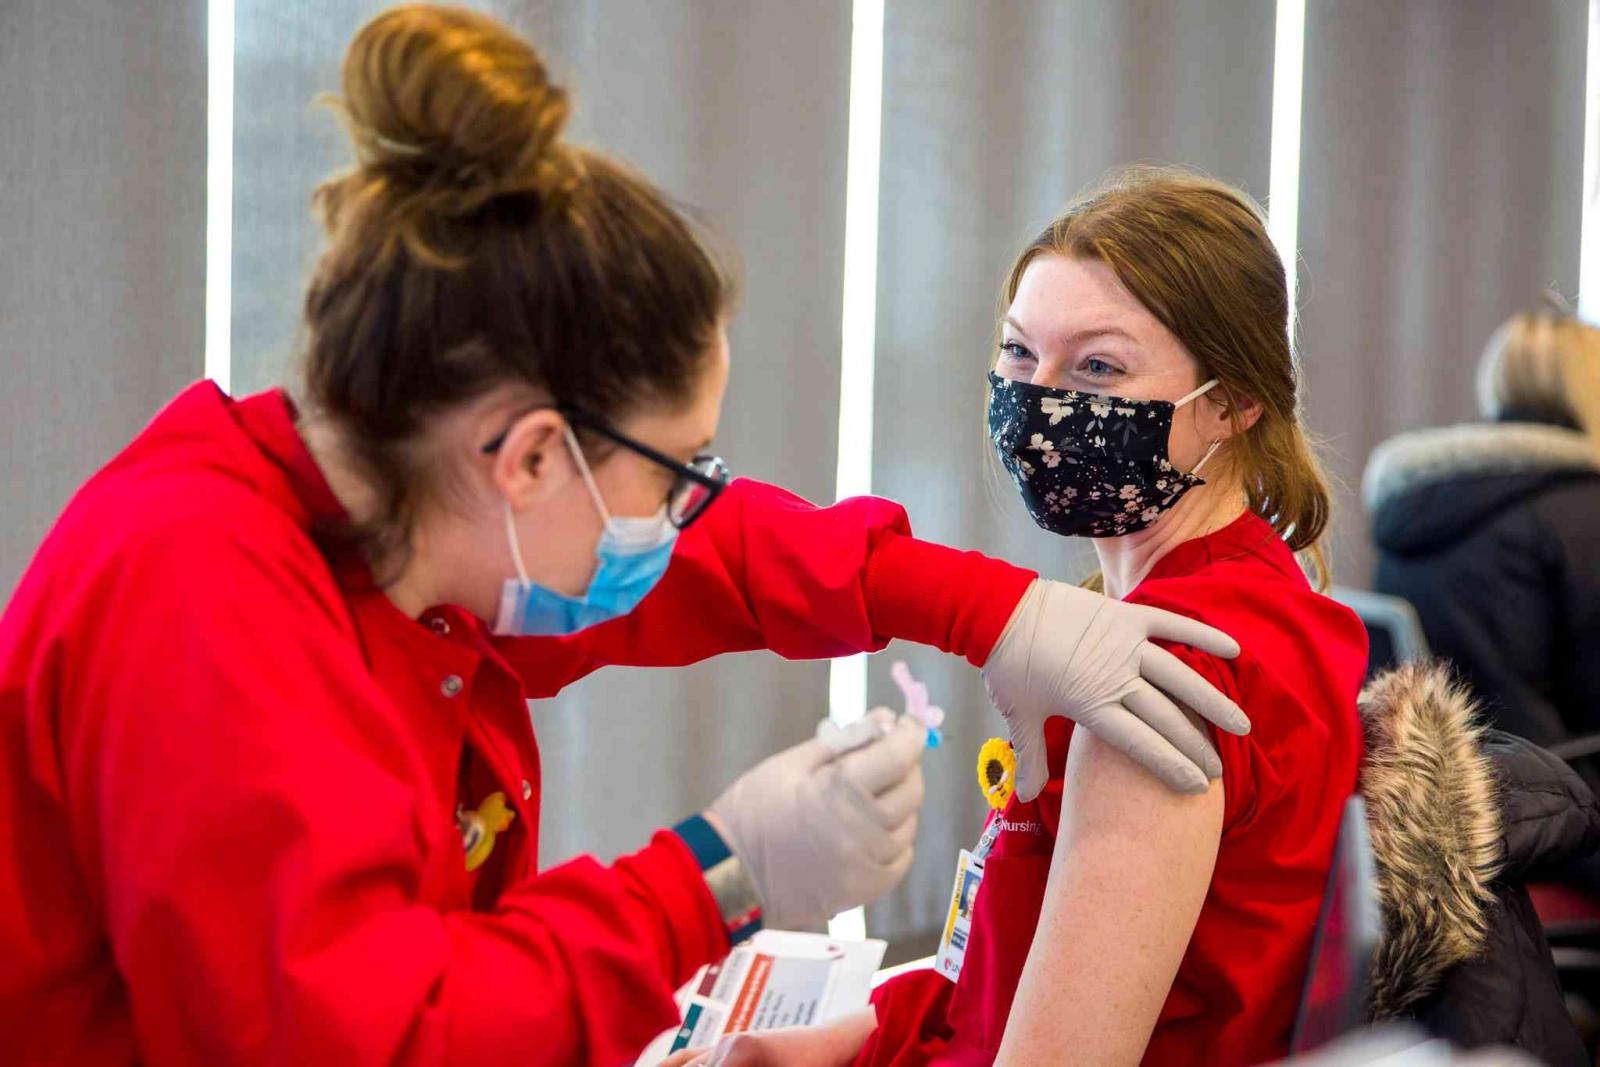 A UNMC student gives a fellow student a COVID-19 vaccine.